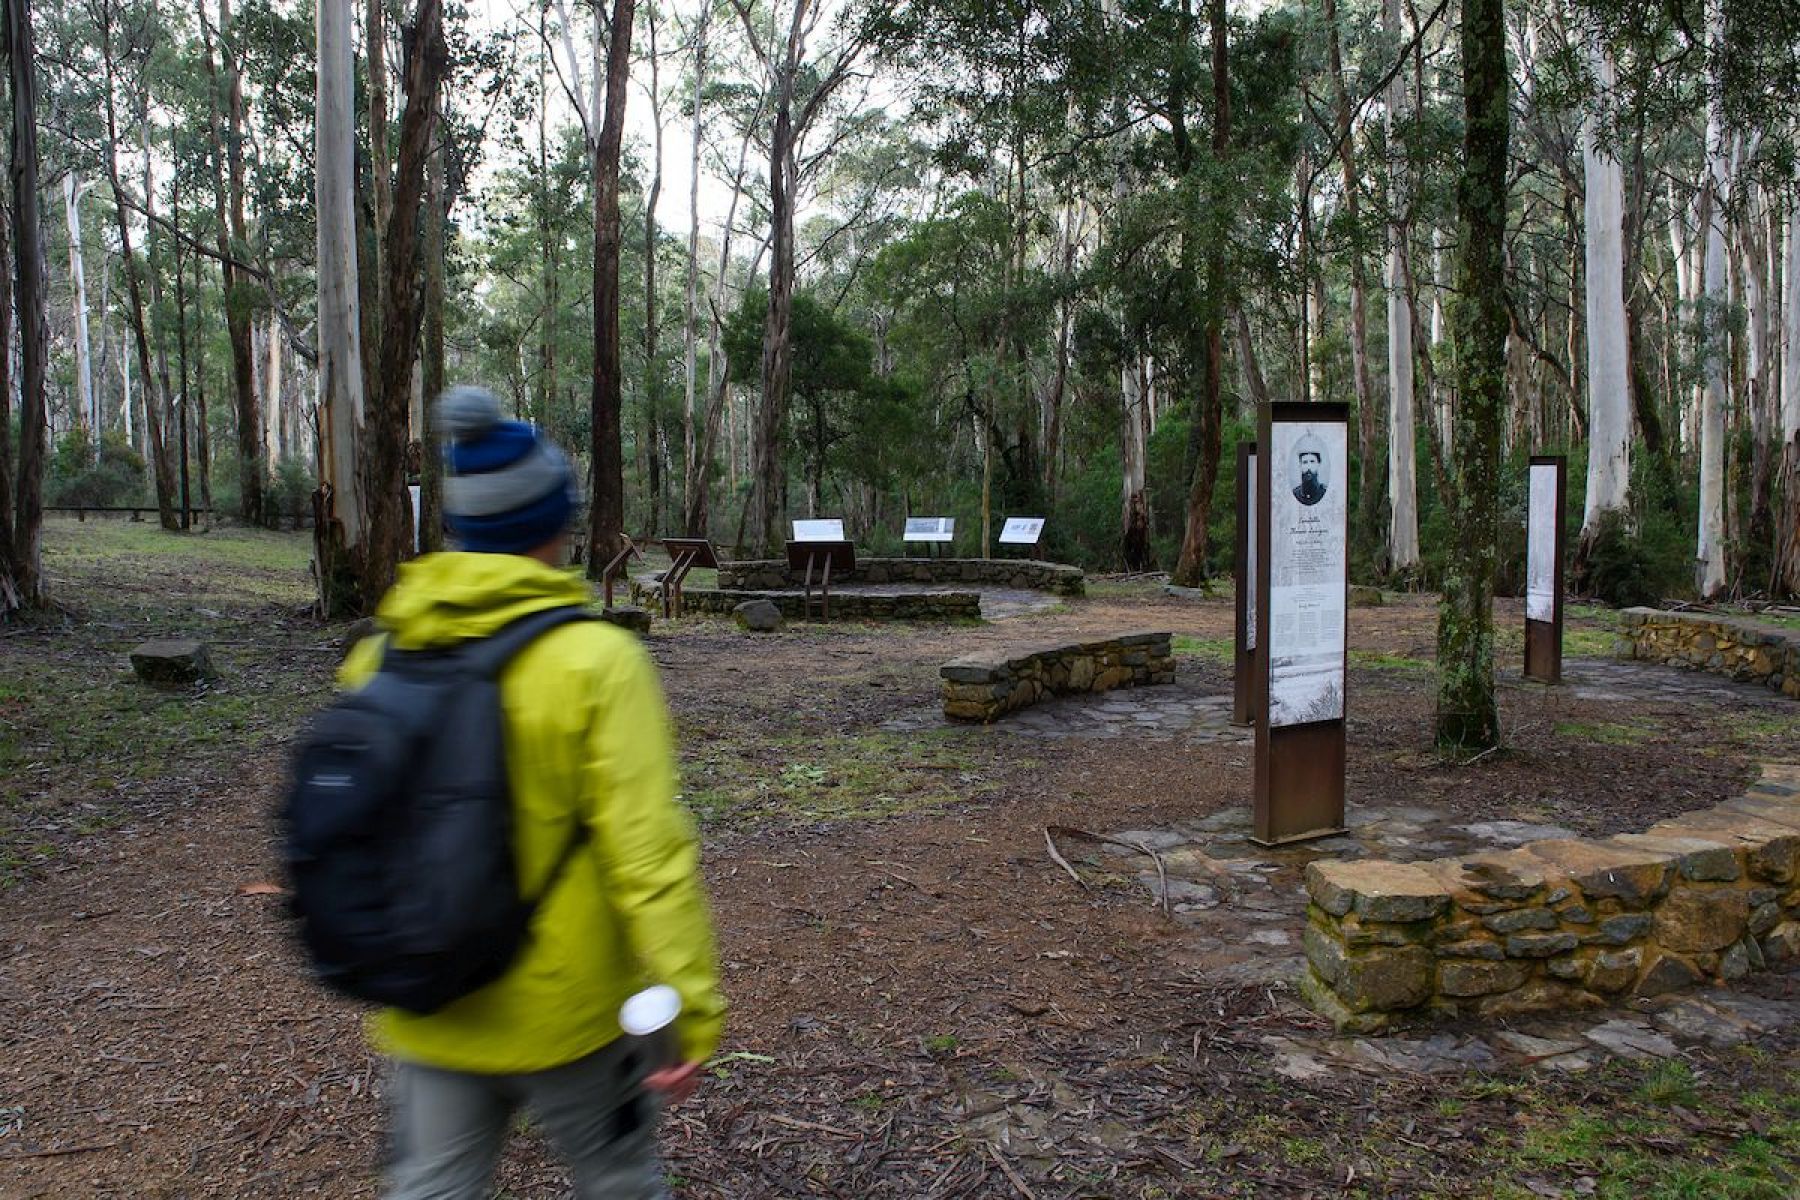 A man walks past signage about the Ned Kelly gang in the bush.